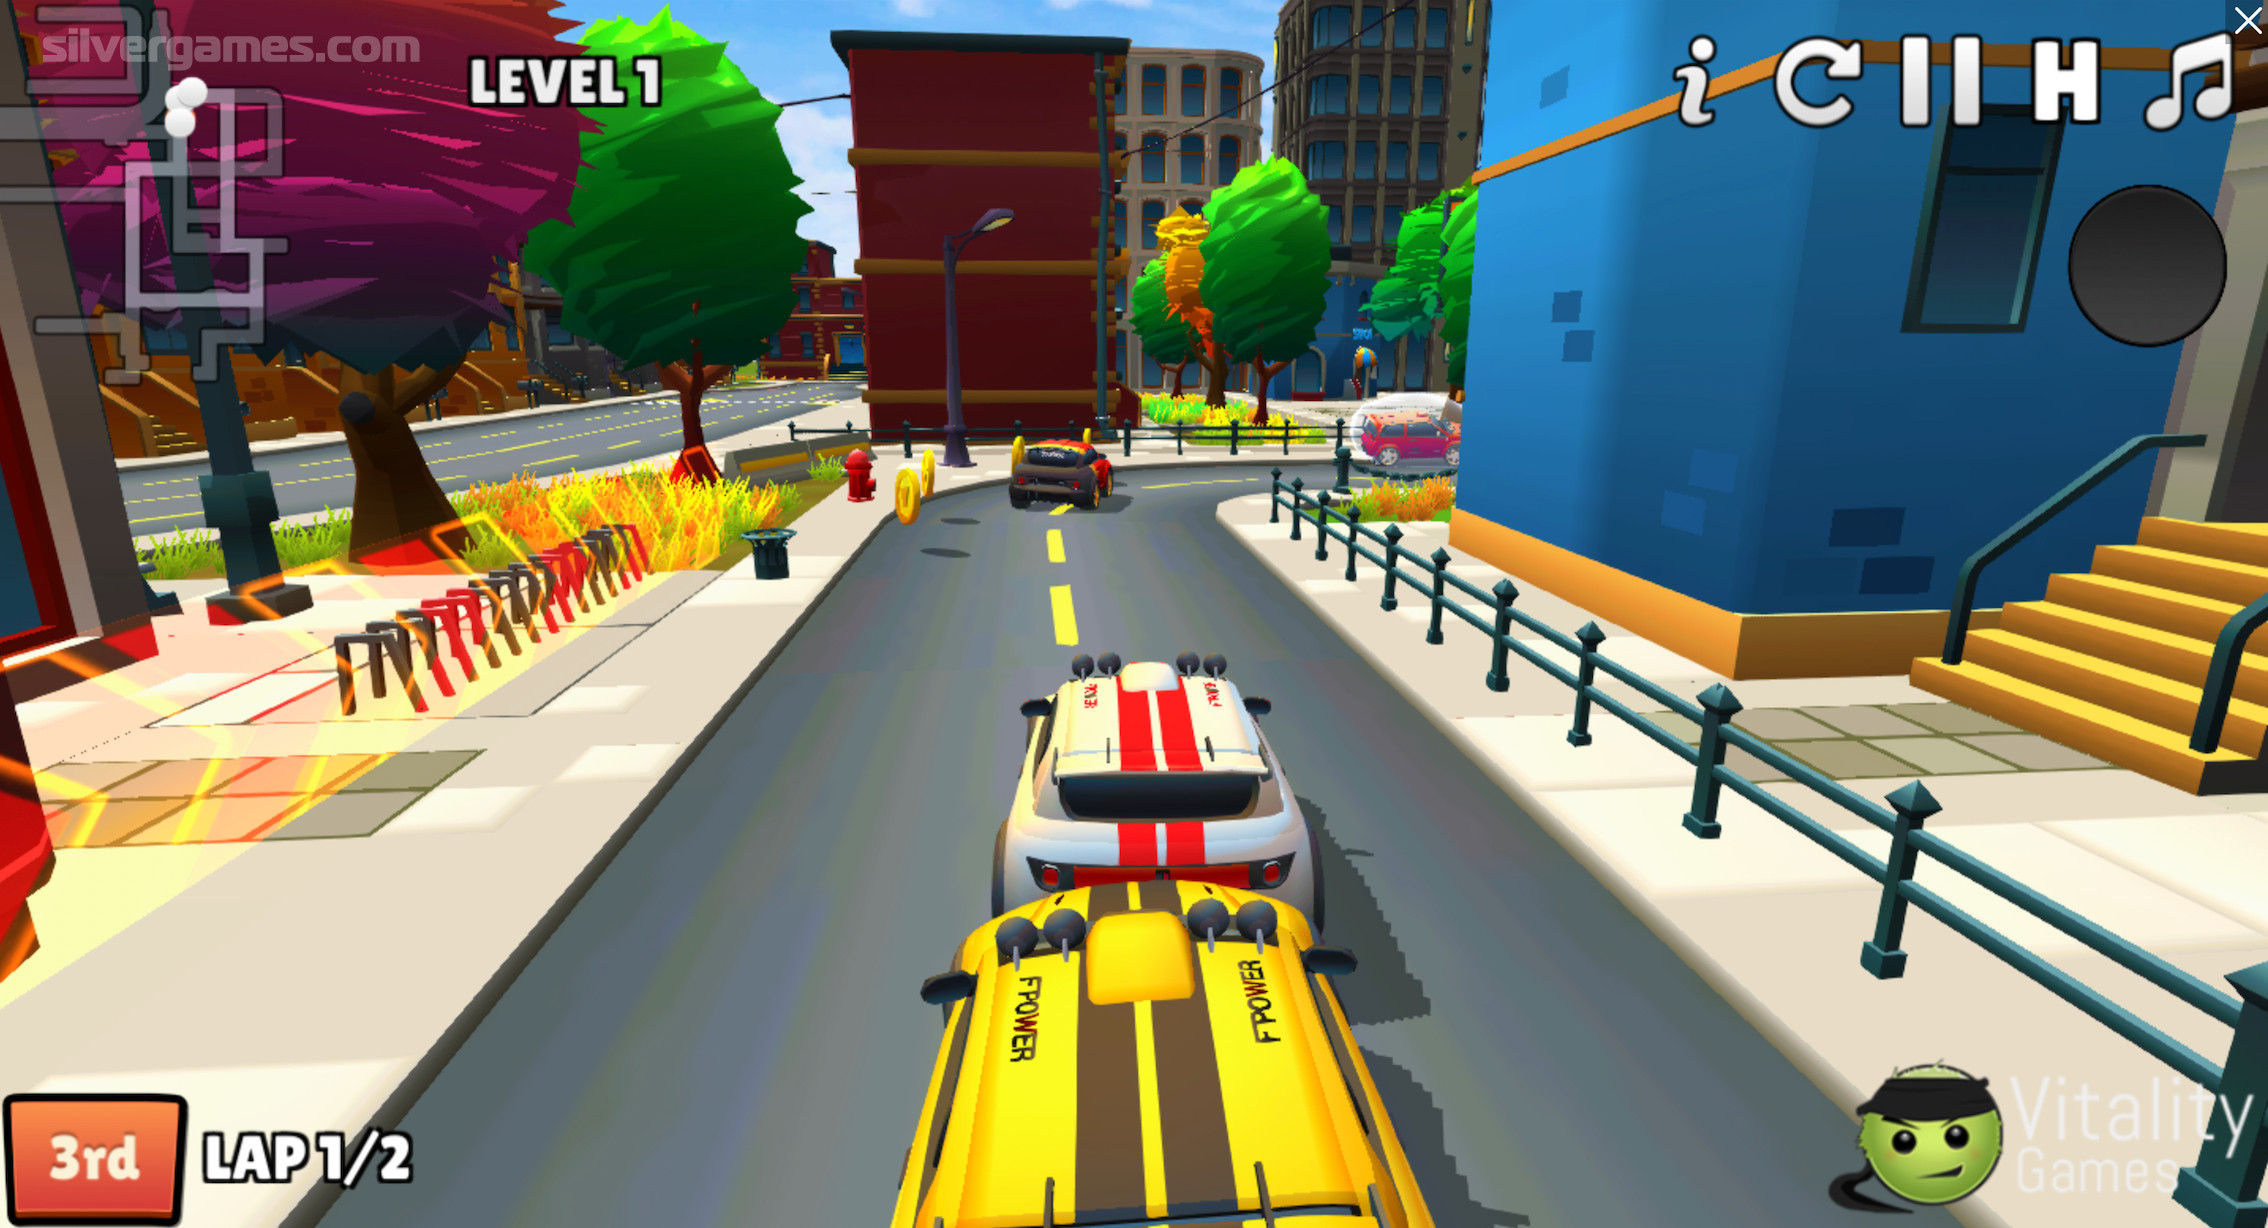 2 PLAYER CITY RACING - Play Online for Free!